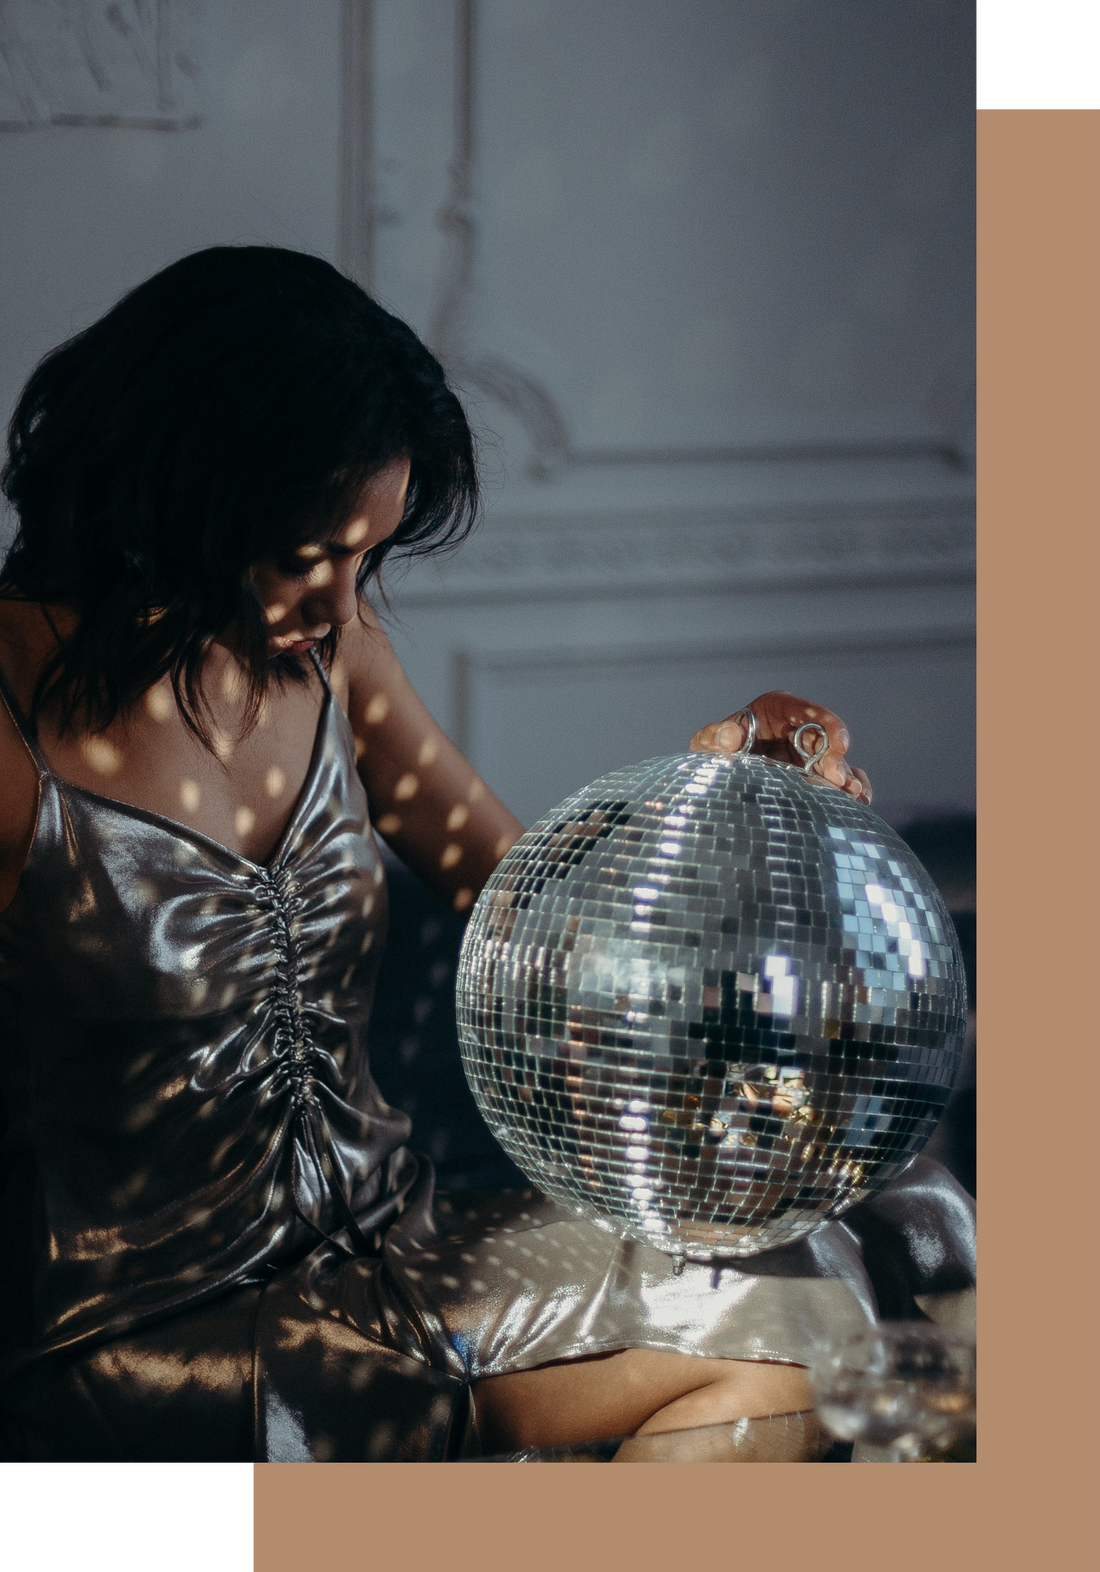  black woman with black hair wearing a silver dress staring at a disco ball